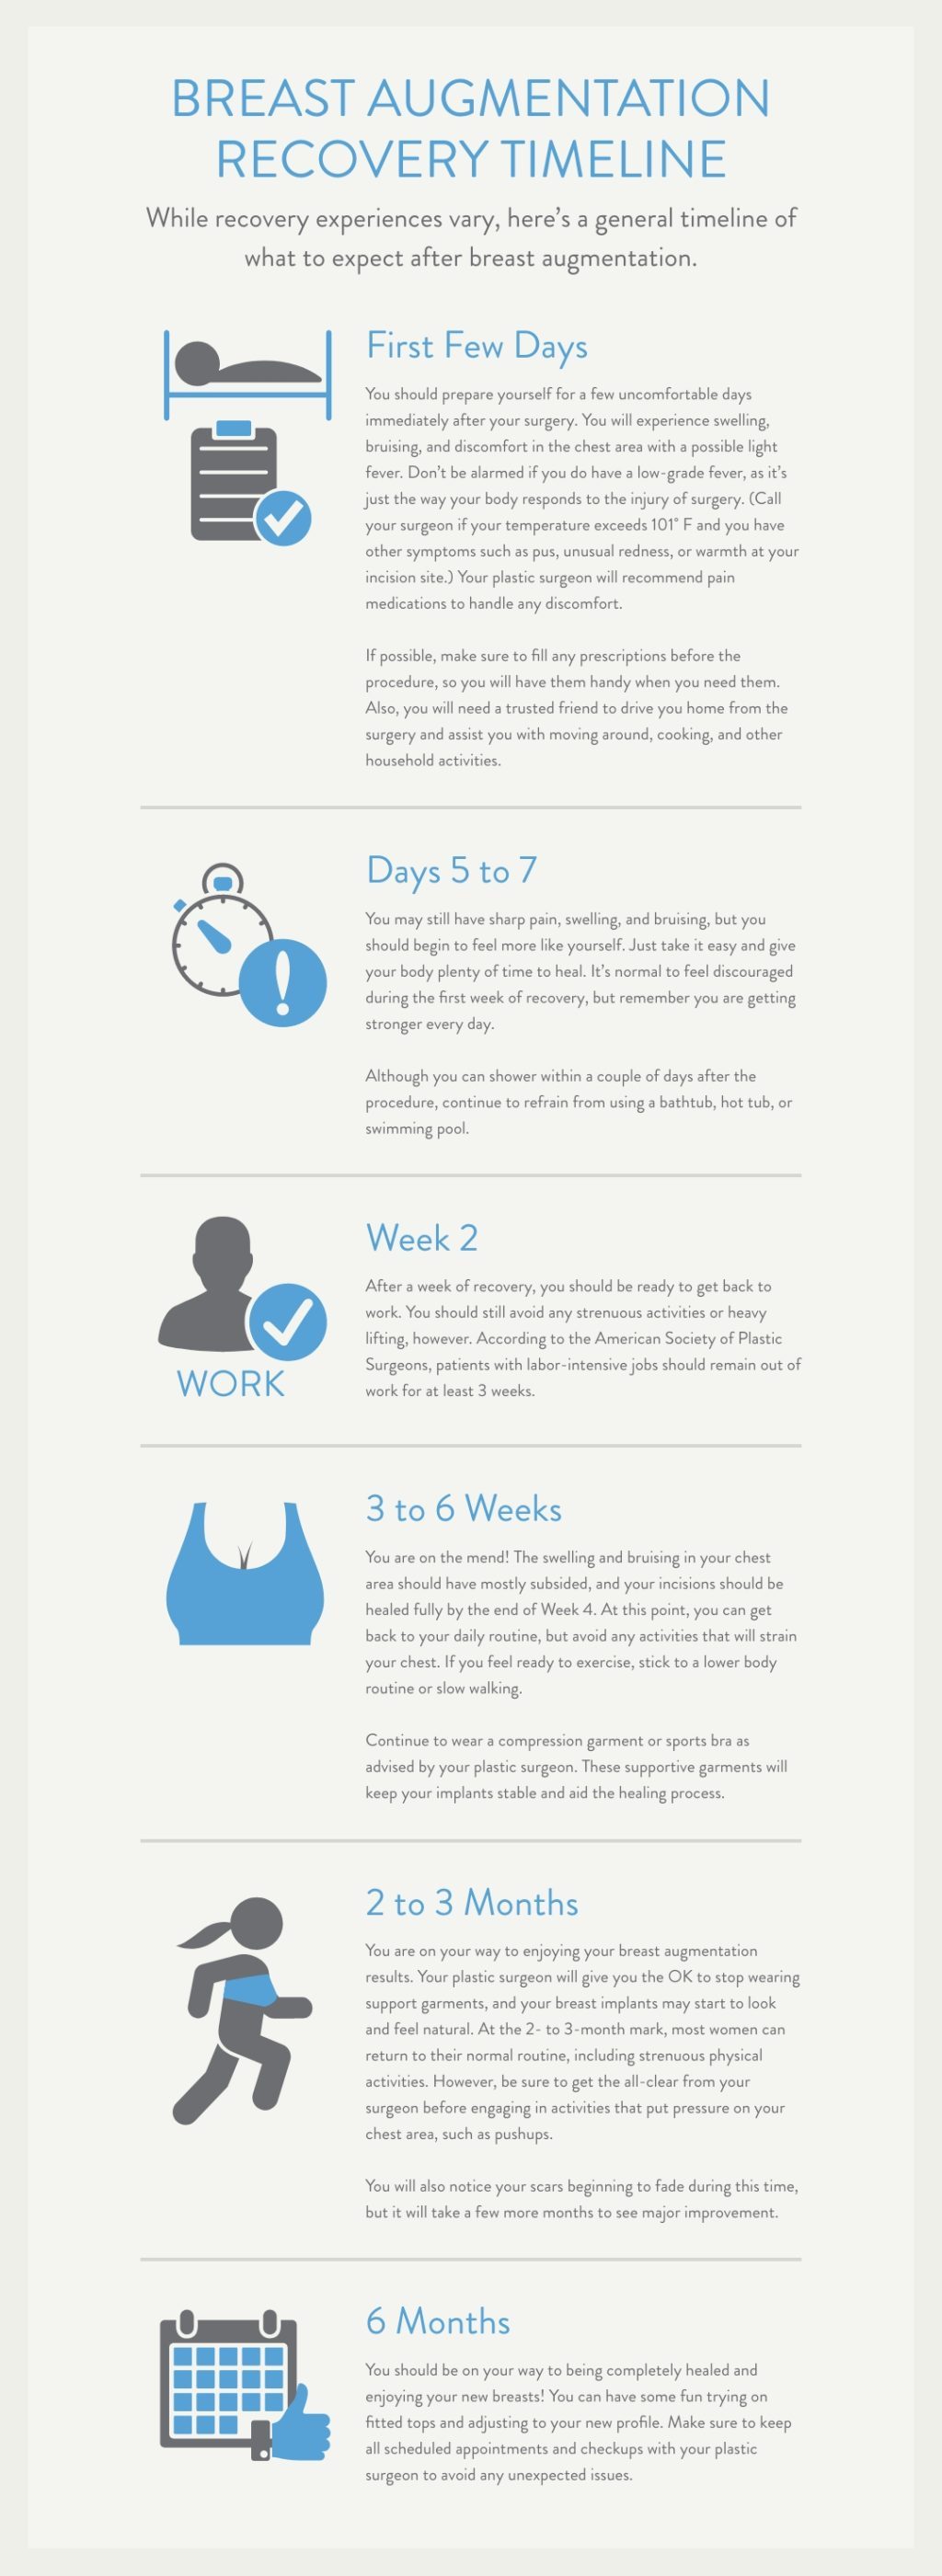 Breast Augmentation Recovery Timeline

While recovery experiences vary, here's a general timeline of
what to expect after breast augmentation.

First Few Days

You should prepare yourself for a few uncomfortable days
immediately after your surgery. You will experience swelling,
bruising, and discomfort in the chest area with a possible light
fever. Don't be alarmed if you do have a low-grade fever, as it's
just the way your body responds to the injury of surgery. (Call
your surgeon if your temperature exceeds 101° F and you have
other symptoms such as pus, unusual redness, or warmth at your
incision site.) Your plastic surgeon will recommend pain
medications to handle any discomfort.

If possible, make sure to fill any prescriptions before the
procedure, so you will have them handy when you need them.
Also, you will need a trusted friend to drive you home from the
surgery and assist you with moving around, cooking, and other
household activities.

Days 5 to 7

You may still have sharp pain, swelling, and bruising, but you
should begin to feel more like yourself. Just take it easy and give
your body plenty of time to heal. It's normal to feel discouraged
during the first week of recovery, but remember you are getting
stronger every day.
Although you can shower within a couple of days after the
procedure, continue to refrain from using a bathtub, hot tub, or
swimming pool.

Week 2

After a week of recovery, you should be ready to get back to
work. You should still avoid any strenuous activities or heavy
lifting, however. According to the American Society of Plastic
Surgeons, patients with labor-intensive jobs should remain out of
work for at least 3 weeks.

3 to 6 Weeks

You are on the mend! The swelling and bruising in your chest
area should have mostly subsided, and your incisions should be
healed fully by the end of Week 4. At this point, you can get
back to your daily routine, but avoid any activities that will strain
your chest. If you feel ready to exercise, stick to a lower body
routine or slow walking.
Continue to wear a compression garment or sports bra as
advised by your plastic surgeon. These supportive garments will
keep your implants stable and aid the healing process.

2 to 3 Months

You are on your way to enjoying your breast augmentation
results. Your plastic surgeon will give you the OK to stop wearing
support garments, and your breast implants may start to look
and feel natural. At the 2- to 3-month mark, most women can
return to their normal routine, including strenuous physical
activities. However, be sure to get the all-clear from your
surgeon before engaging in activities that put pressure on your
chest area, such as pushups.
You will also notice your scars beginning to fade during this time,
but it will take a few more months to see major improvement.

6 Months

You should be on your way to being completely healed and
enjoying your new breasts! You can have some fun trying on
fitted tops and adjusting to your new profile. Make sure to keep
all scheduled appointments and checkups with your plastic
surgeon to avoid any unexpected issues.